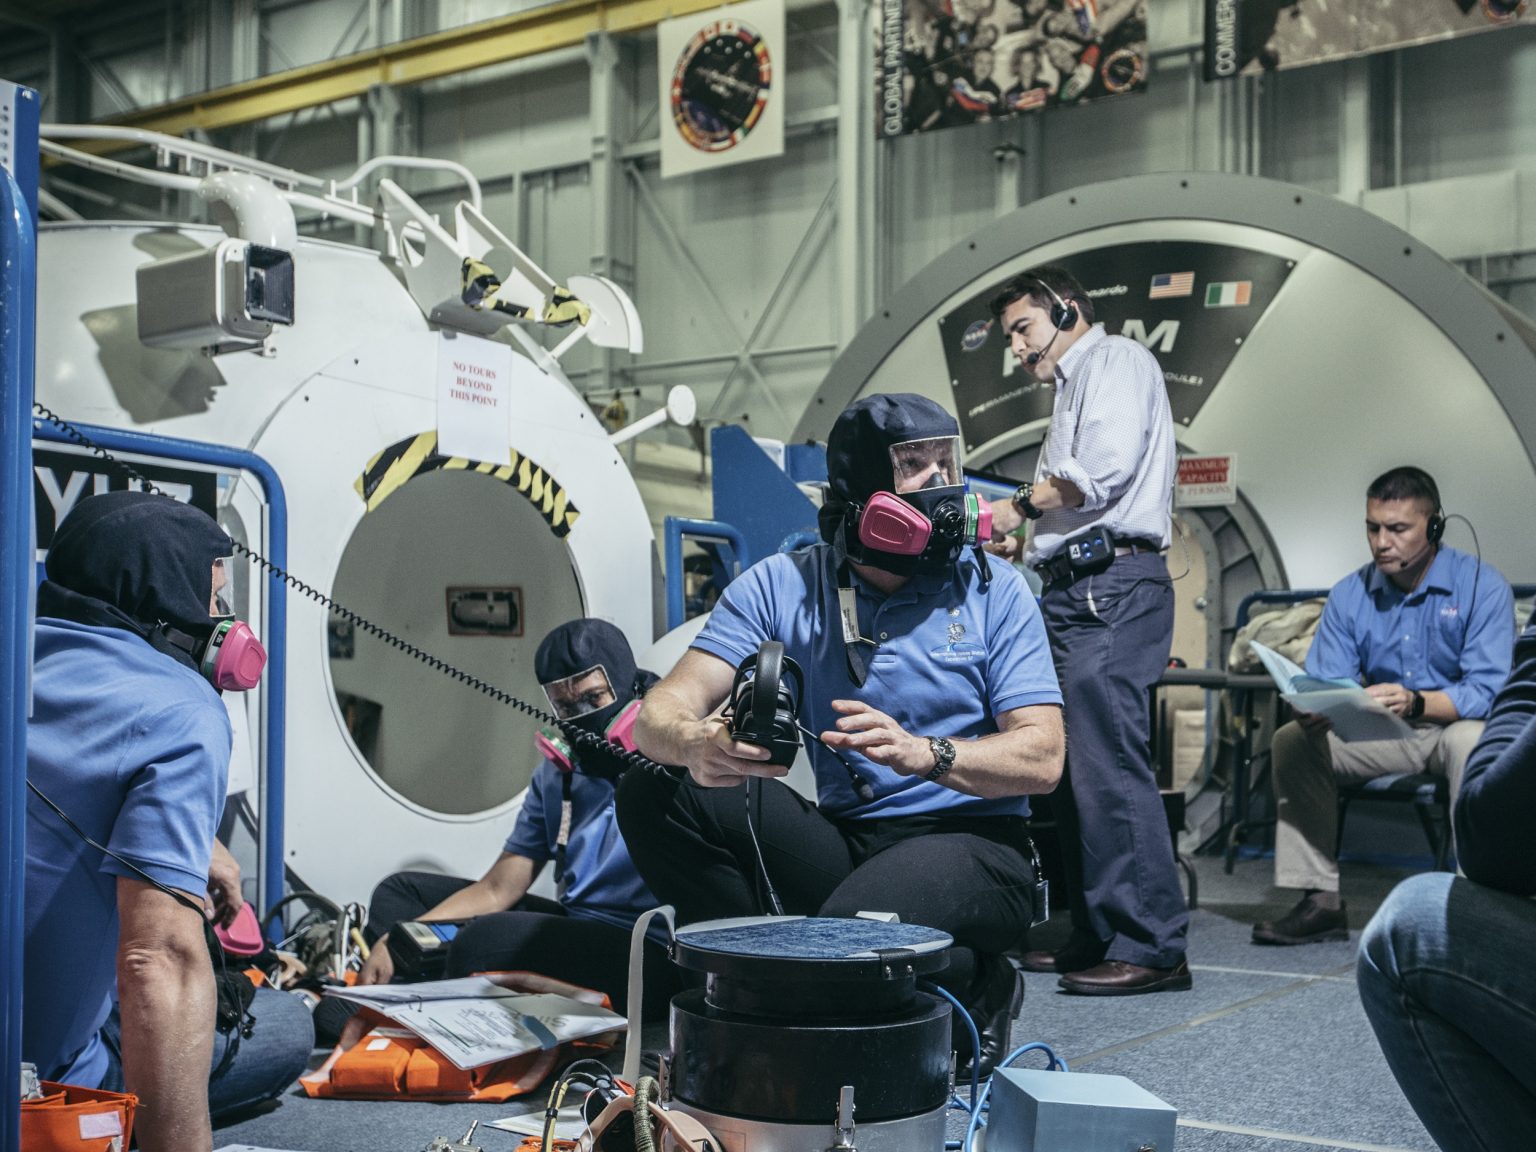 Alexander Gerst during a simulated ammonia leak in the ISS. NASA Johnson Space Center, Houston, Texas, USA, 2018